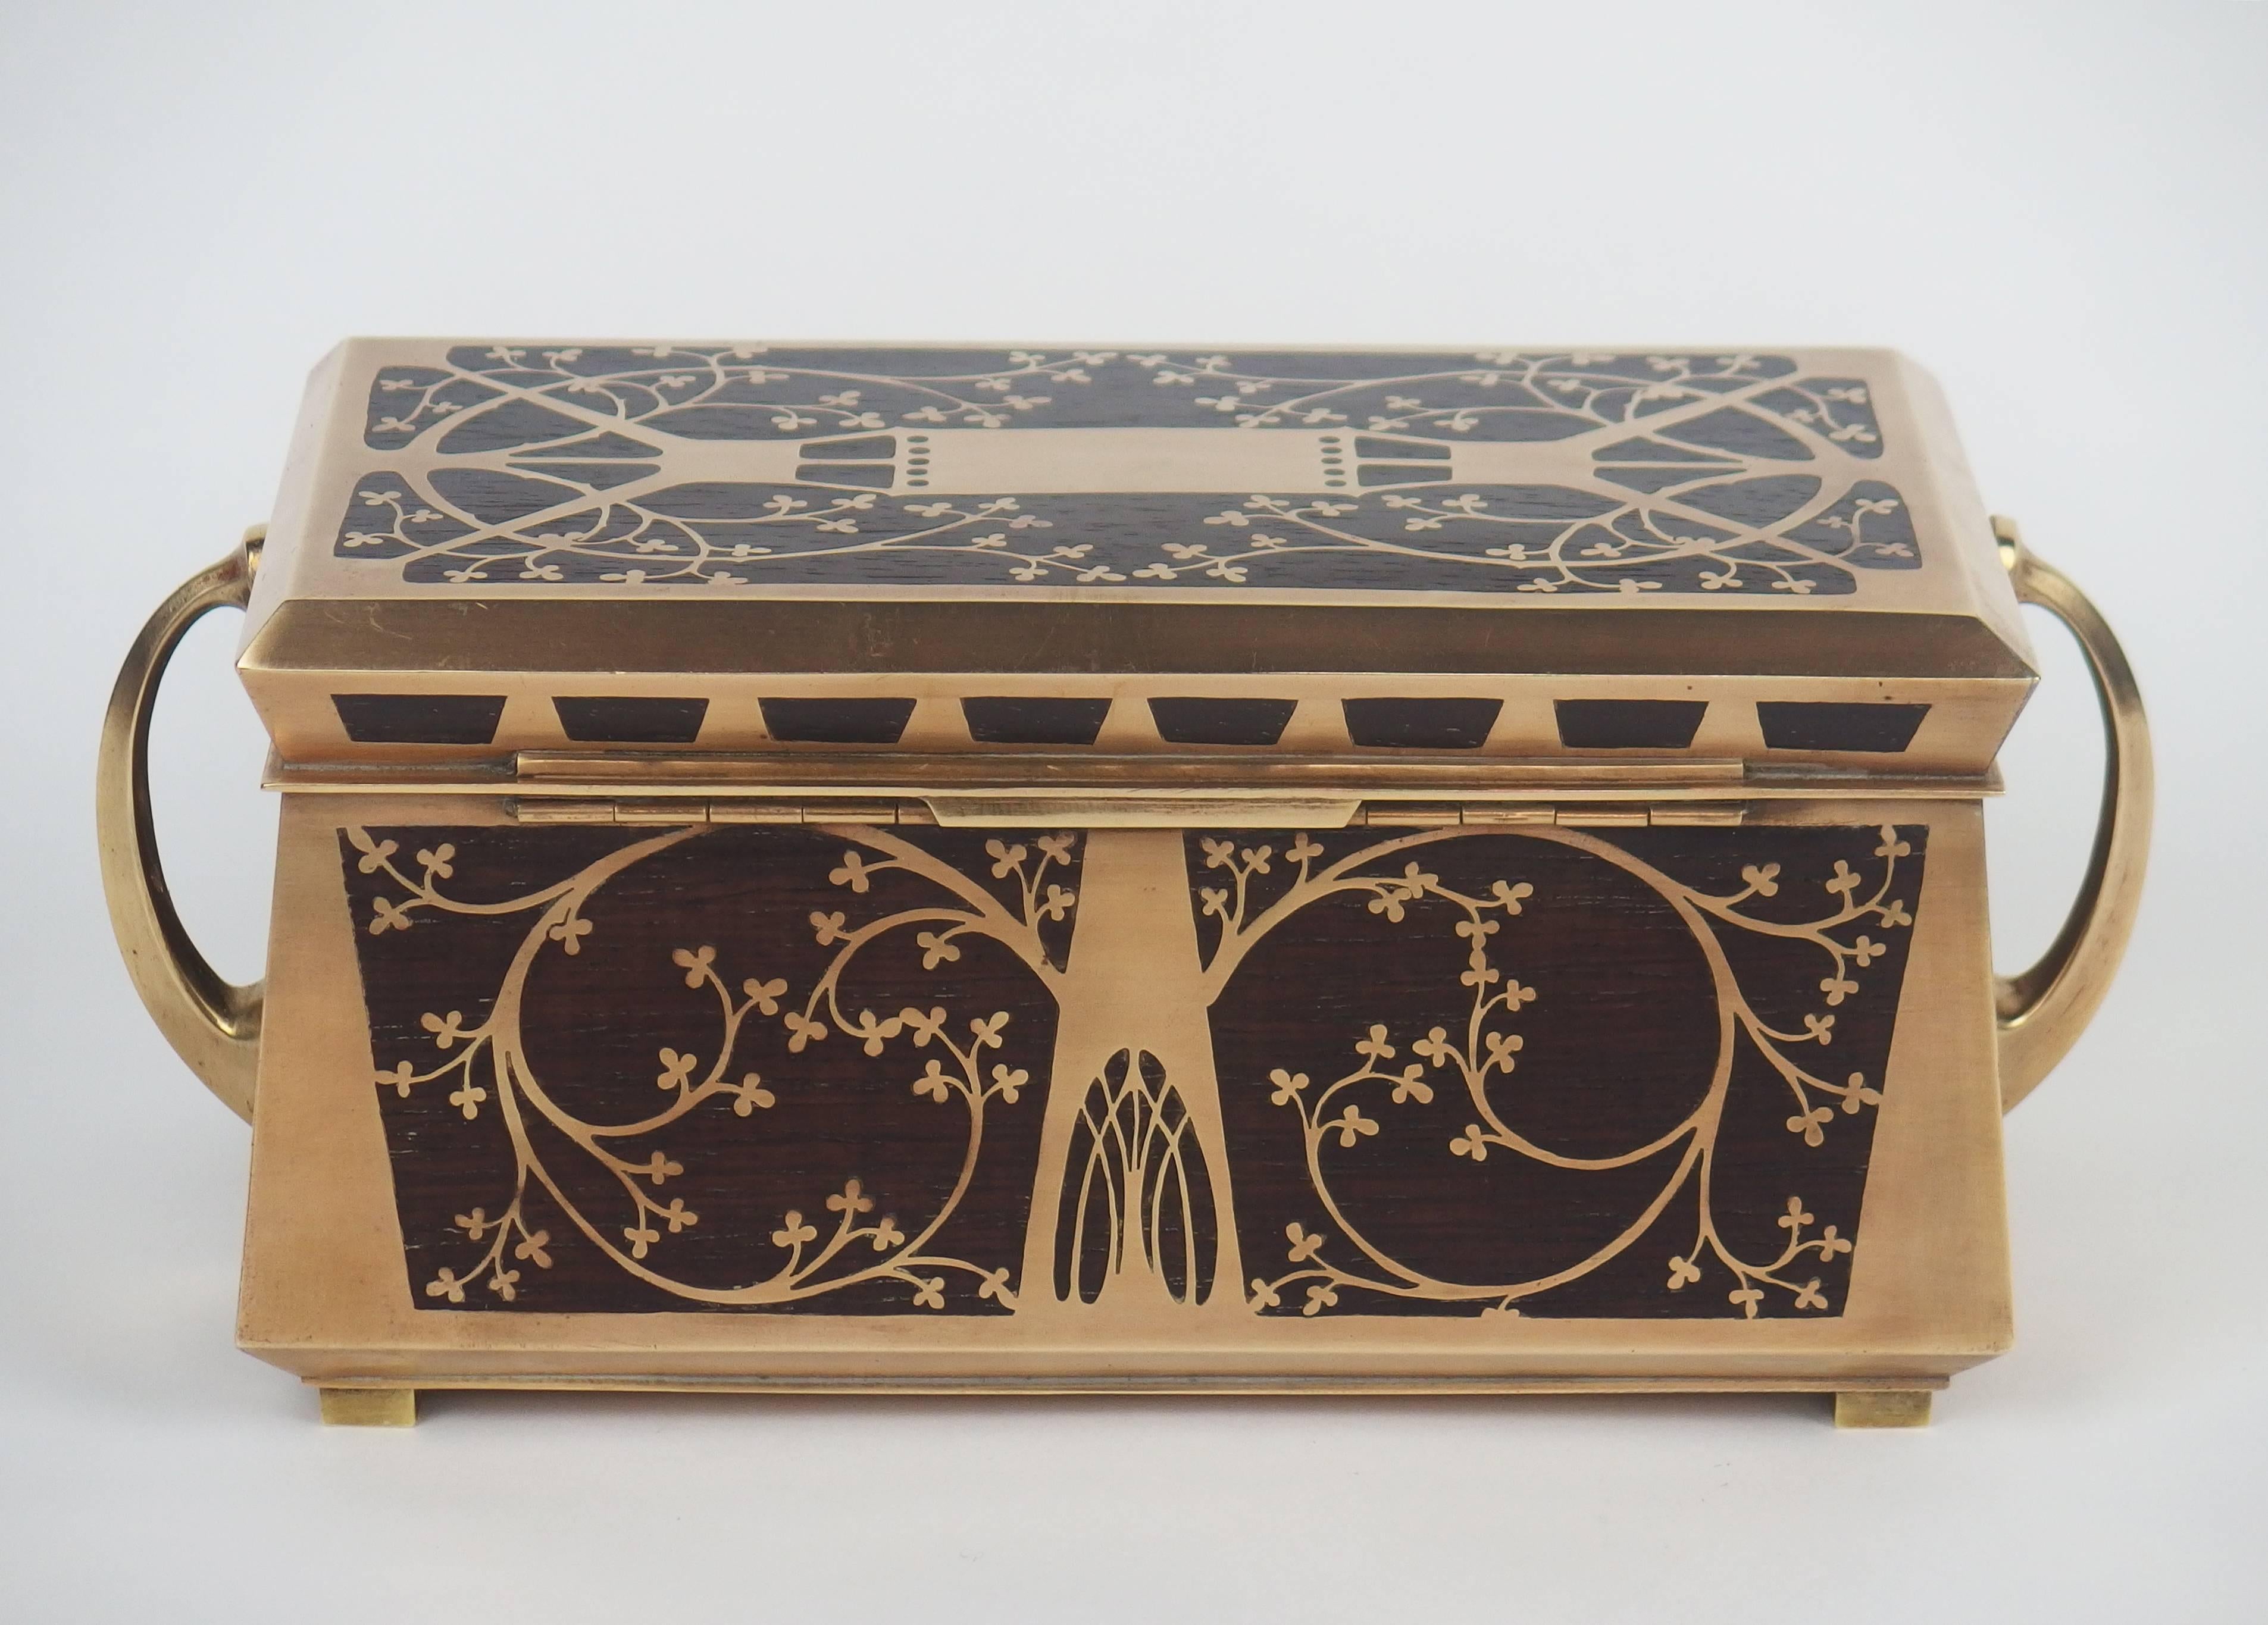 A jewelry box inlaid with rosewood and brass. Lyre birds decorations on the front. Original red velvet inside the box.